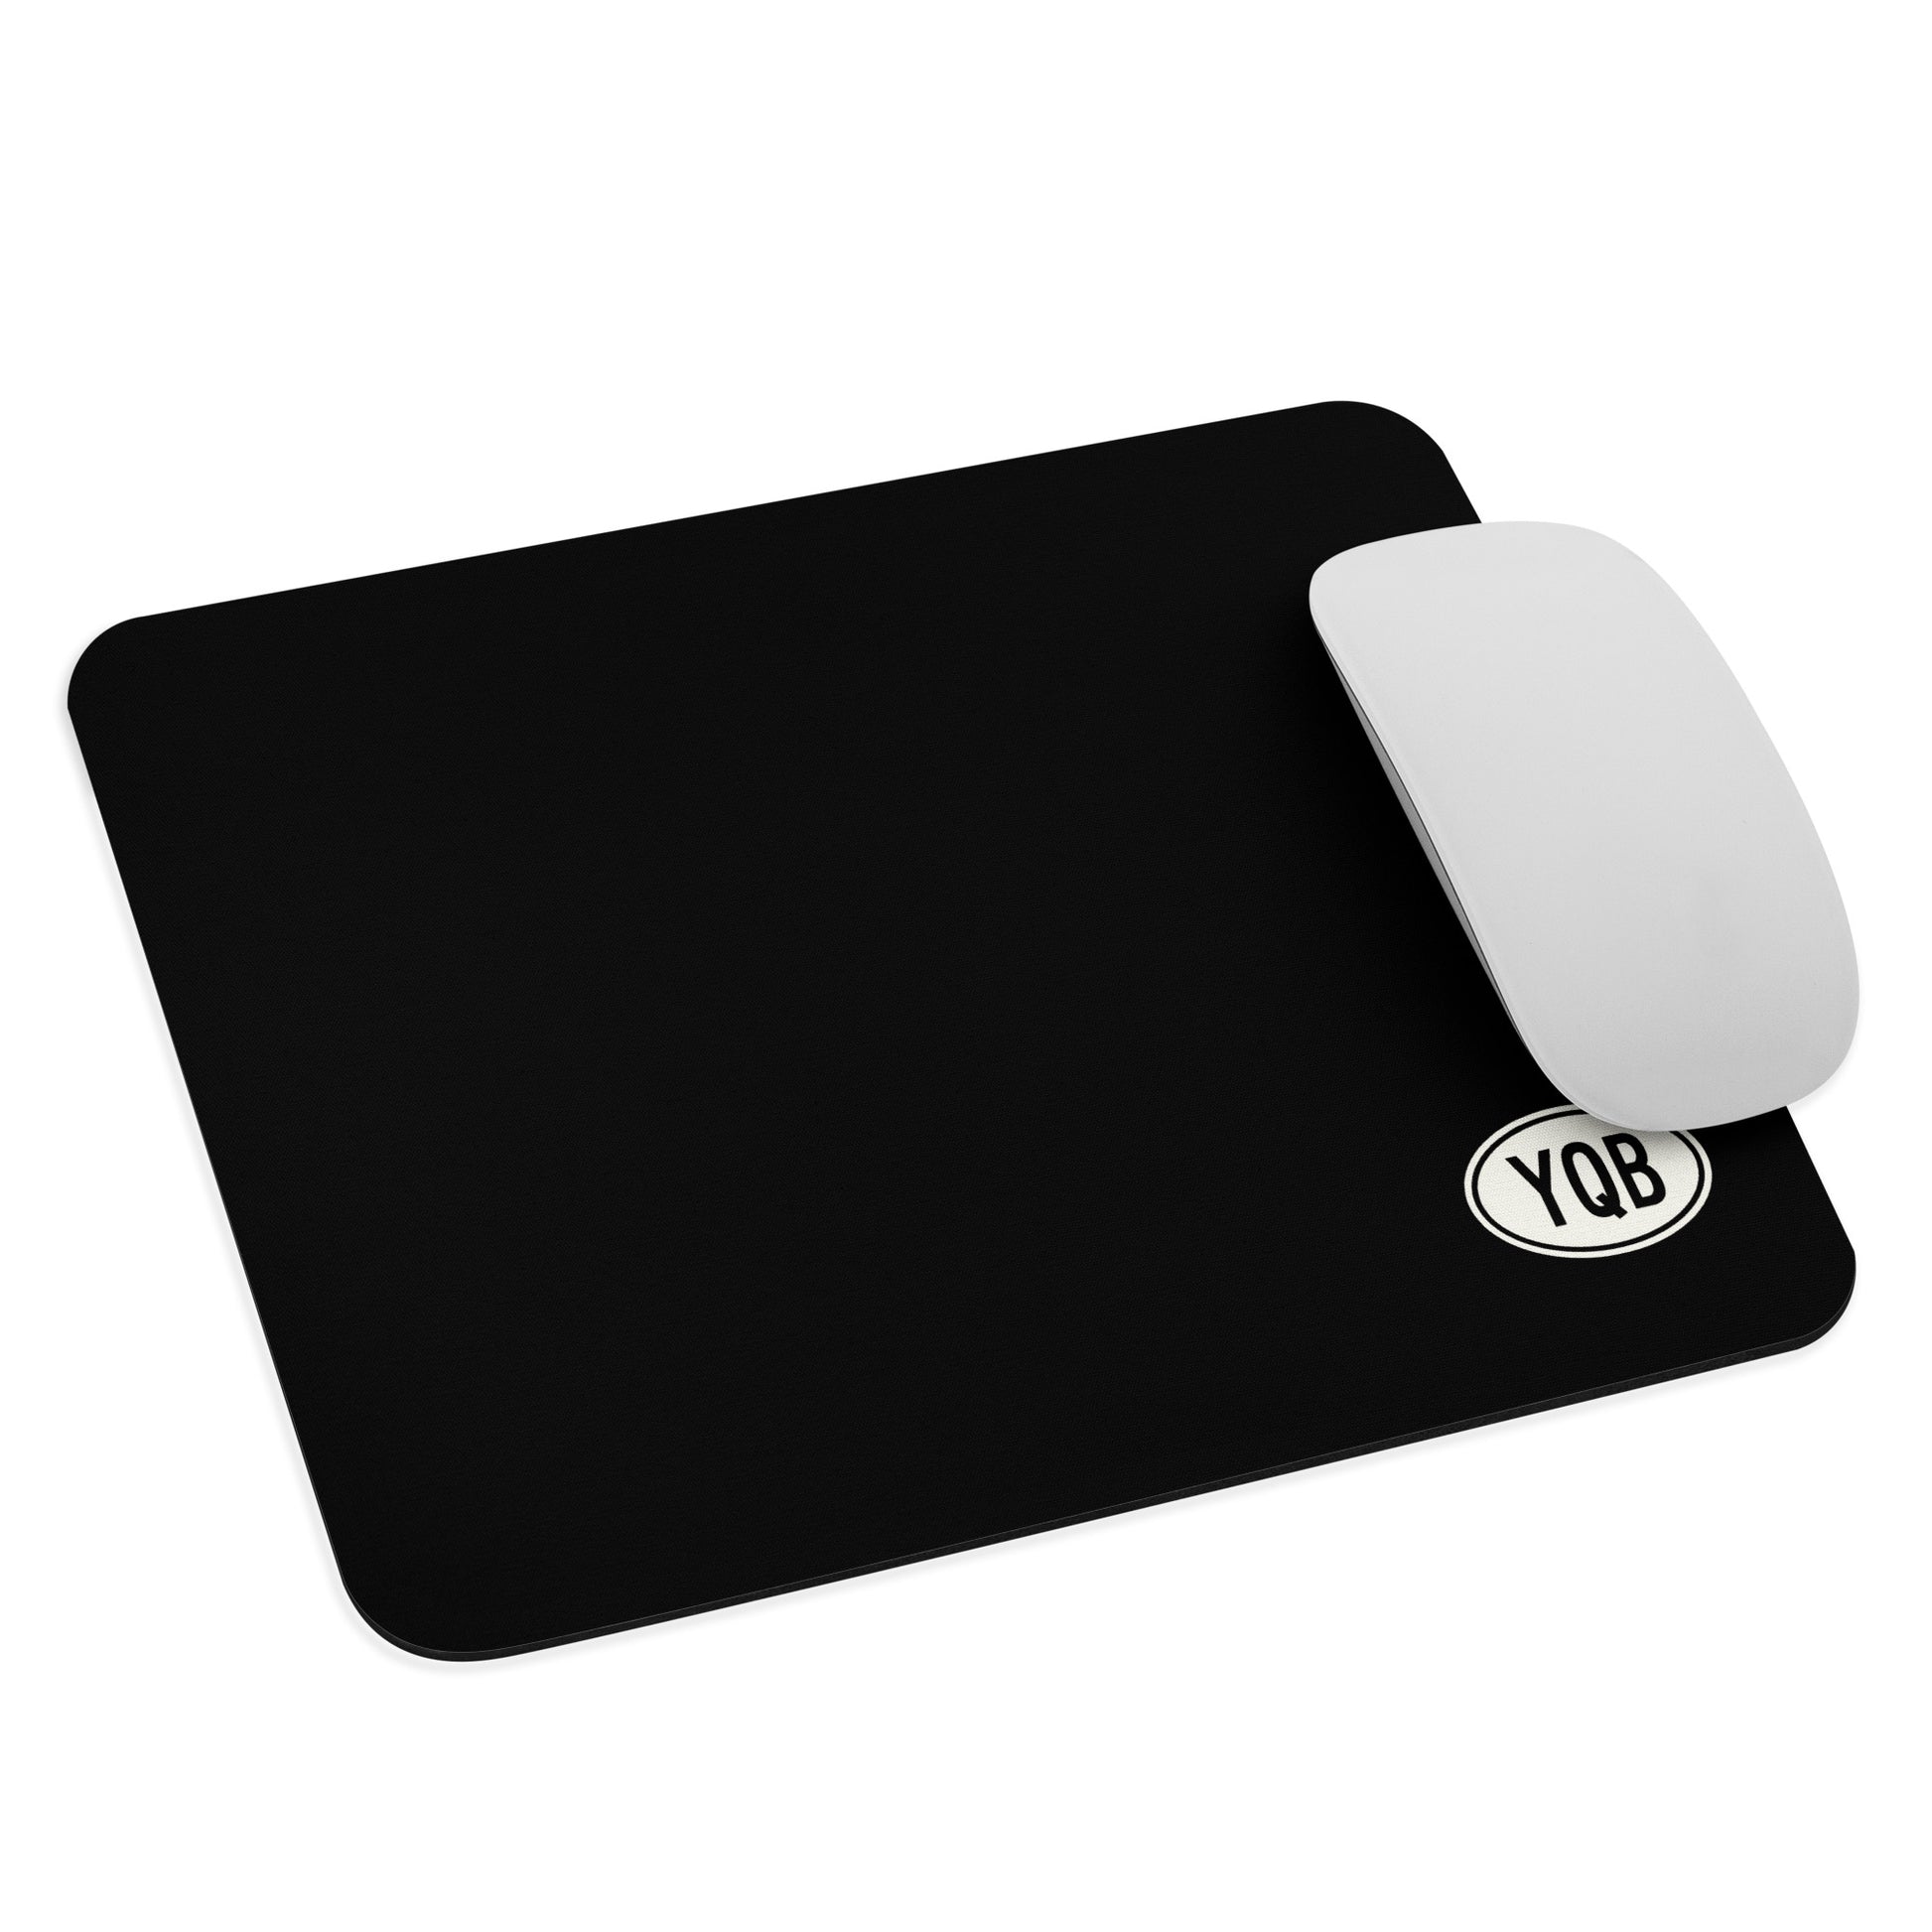 Unique Travel Gift Mouse Pad - White Oval • YQB Quebec City • YHM Designs - Image 03